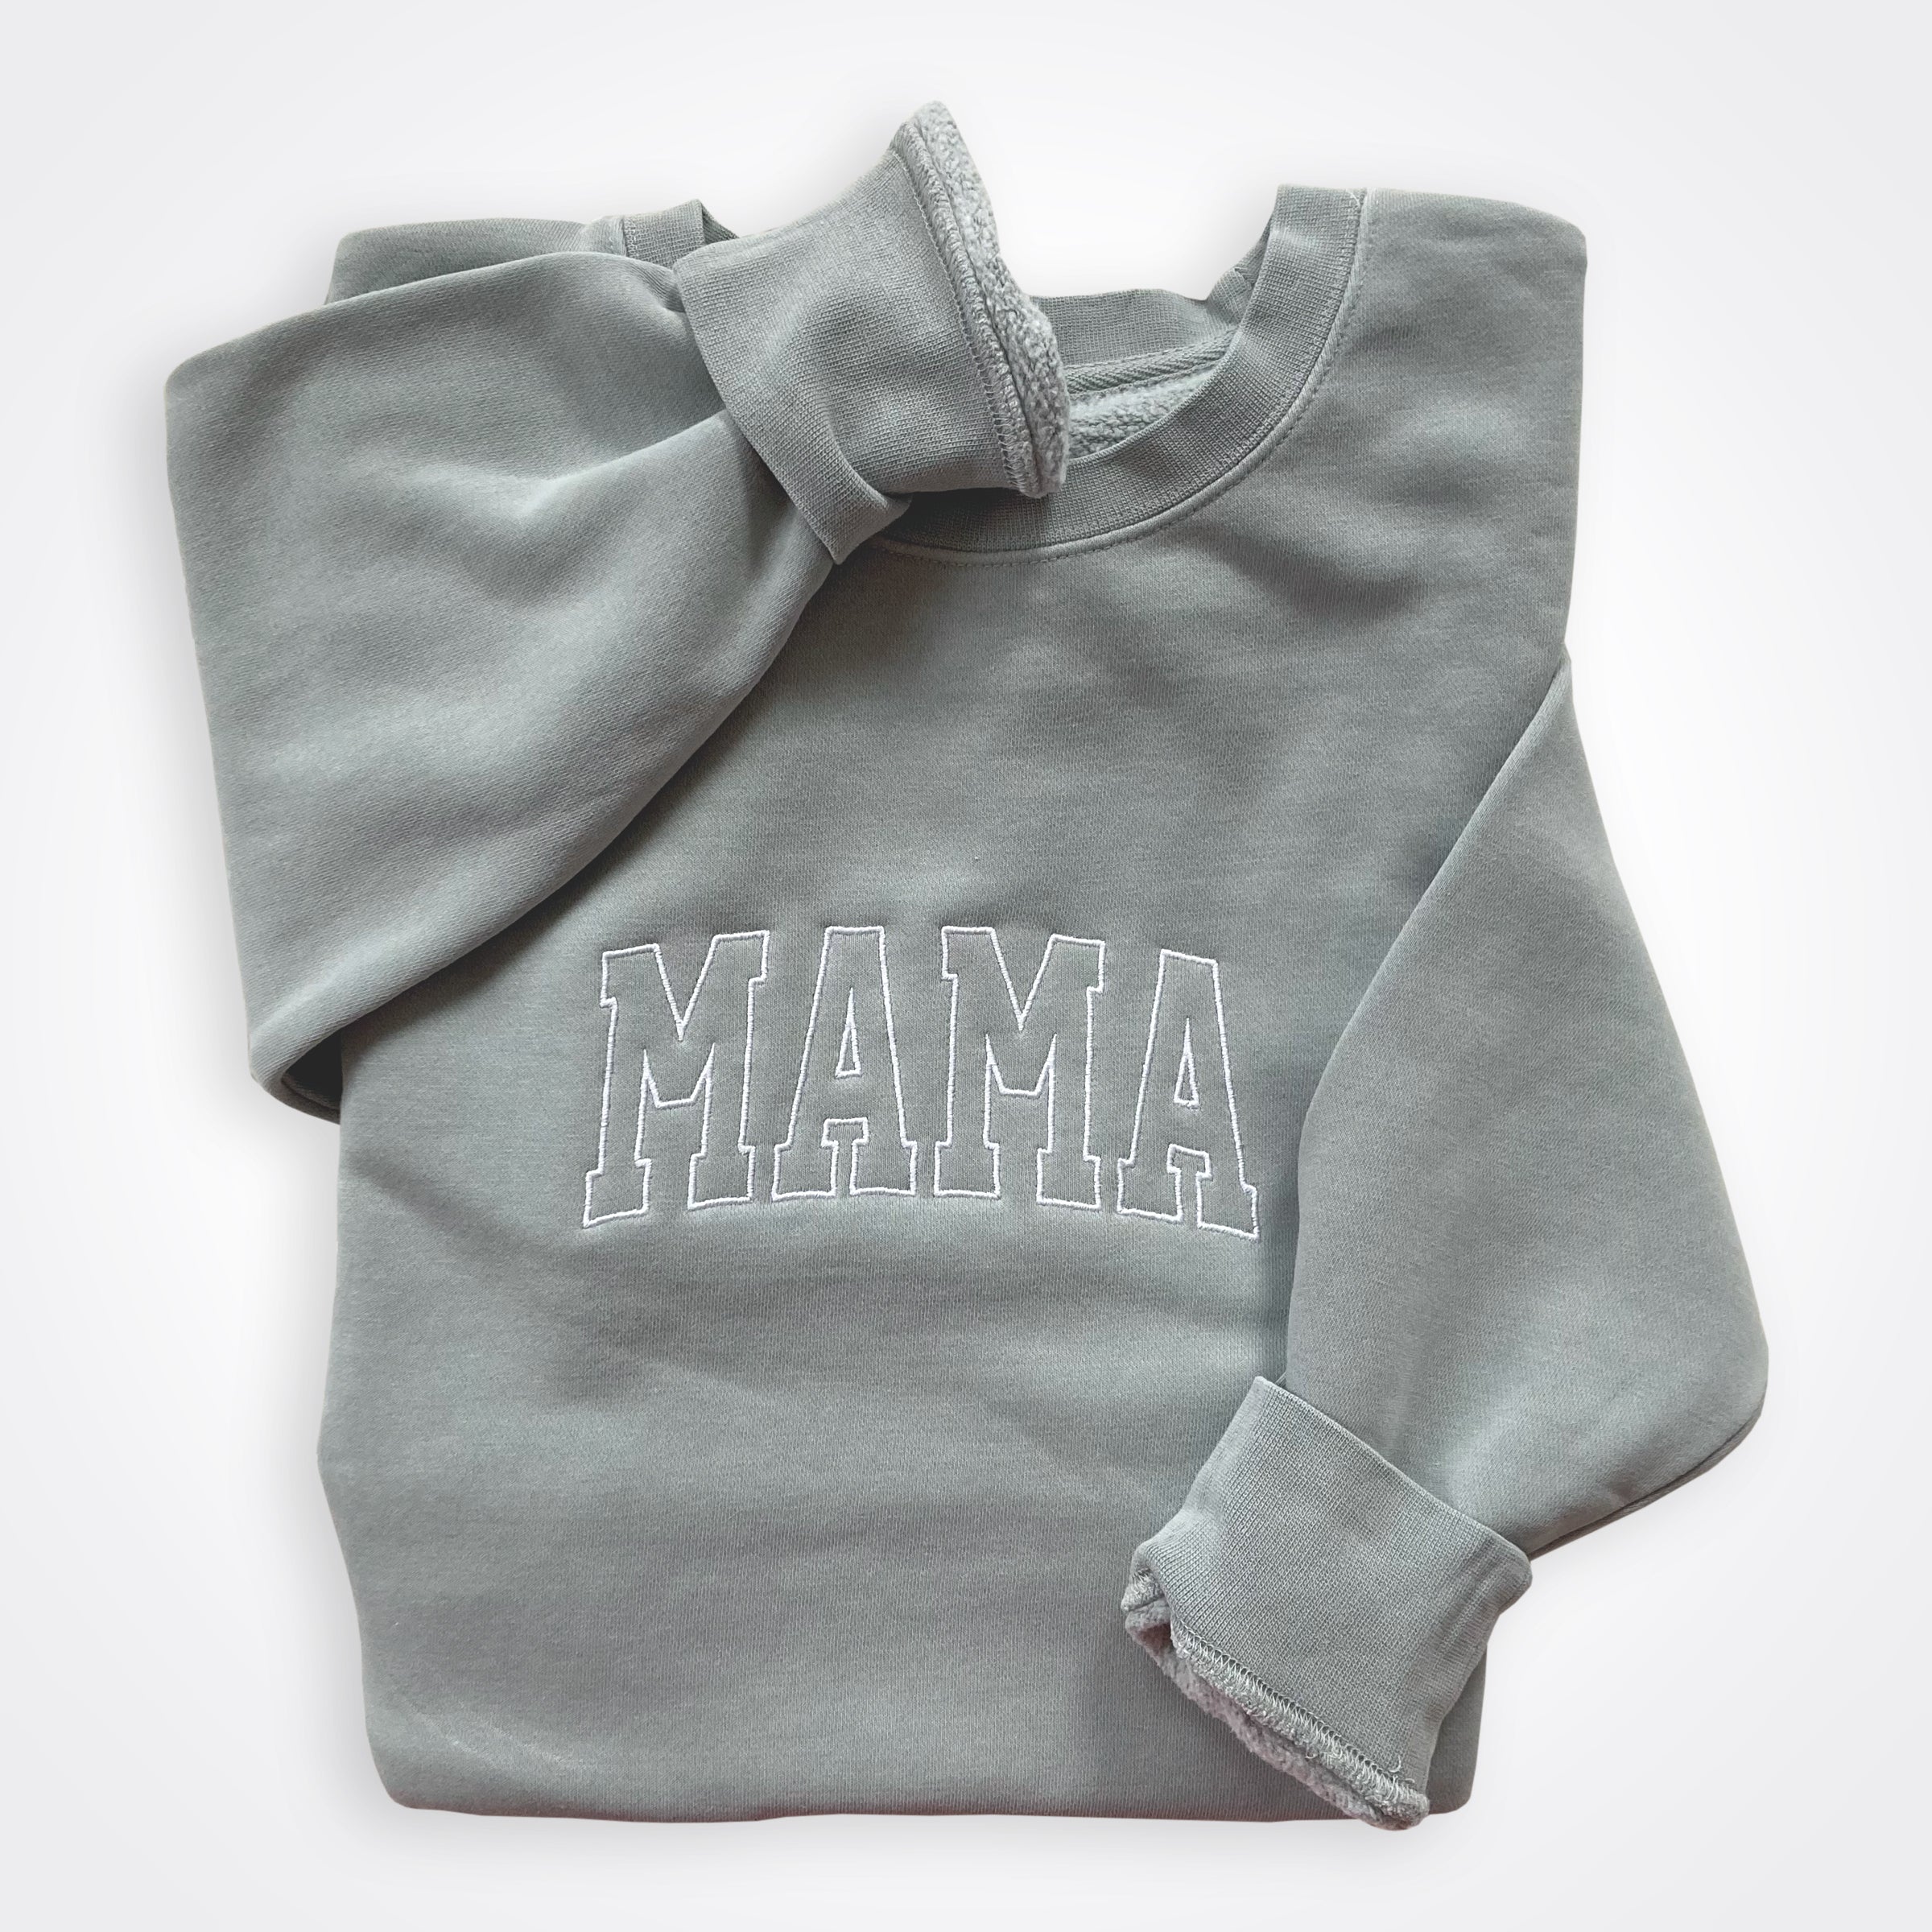 Mama Embroidered Midweight Pigment Dyed Crew Sweatshirt